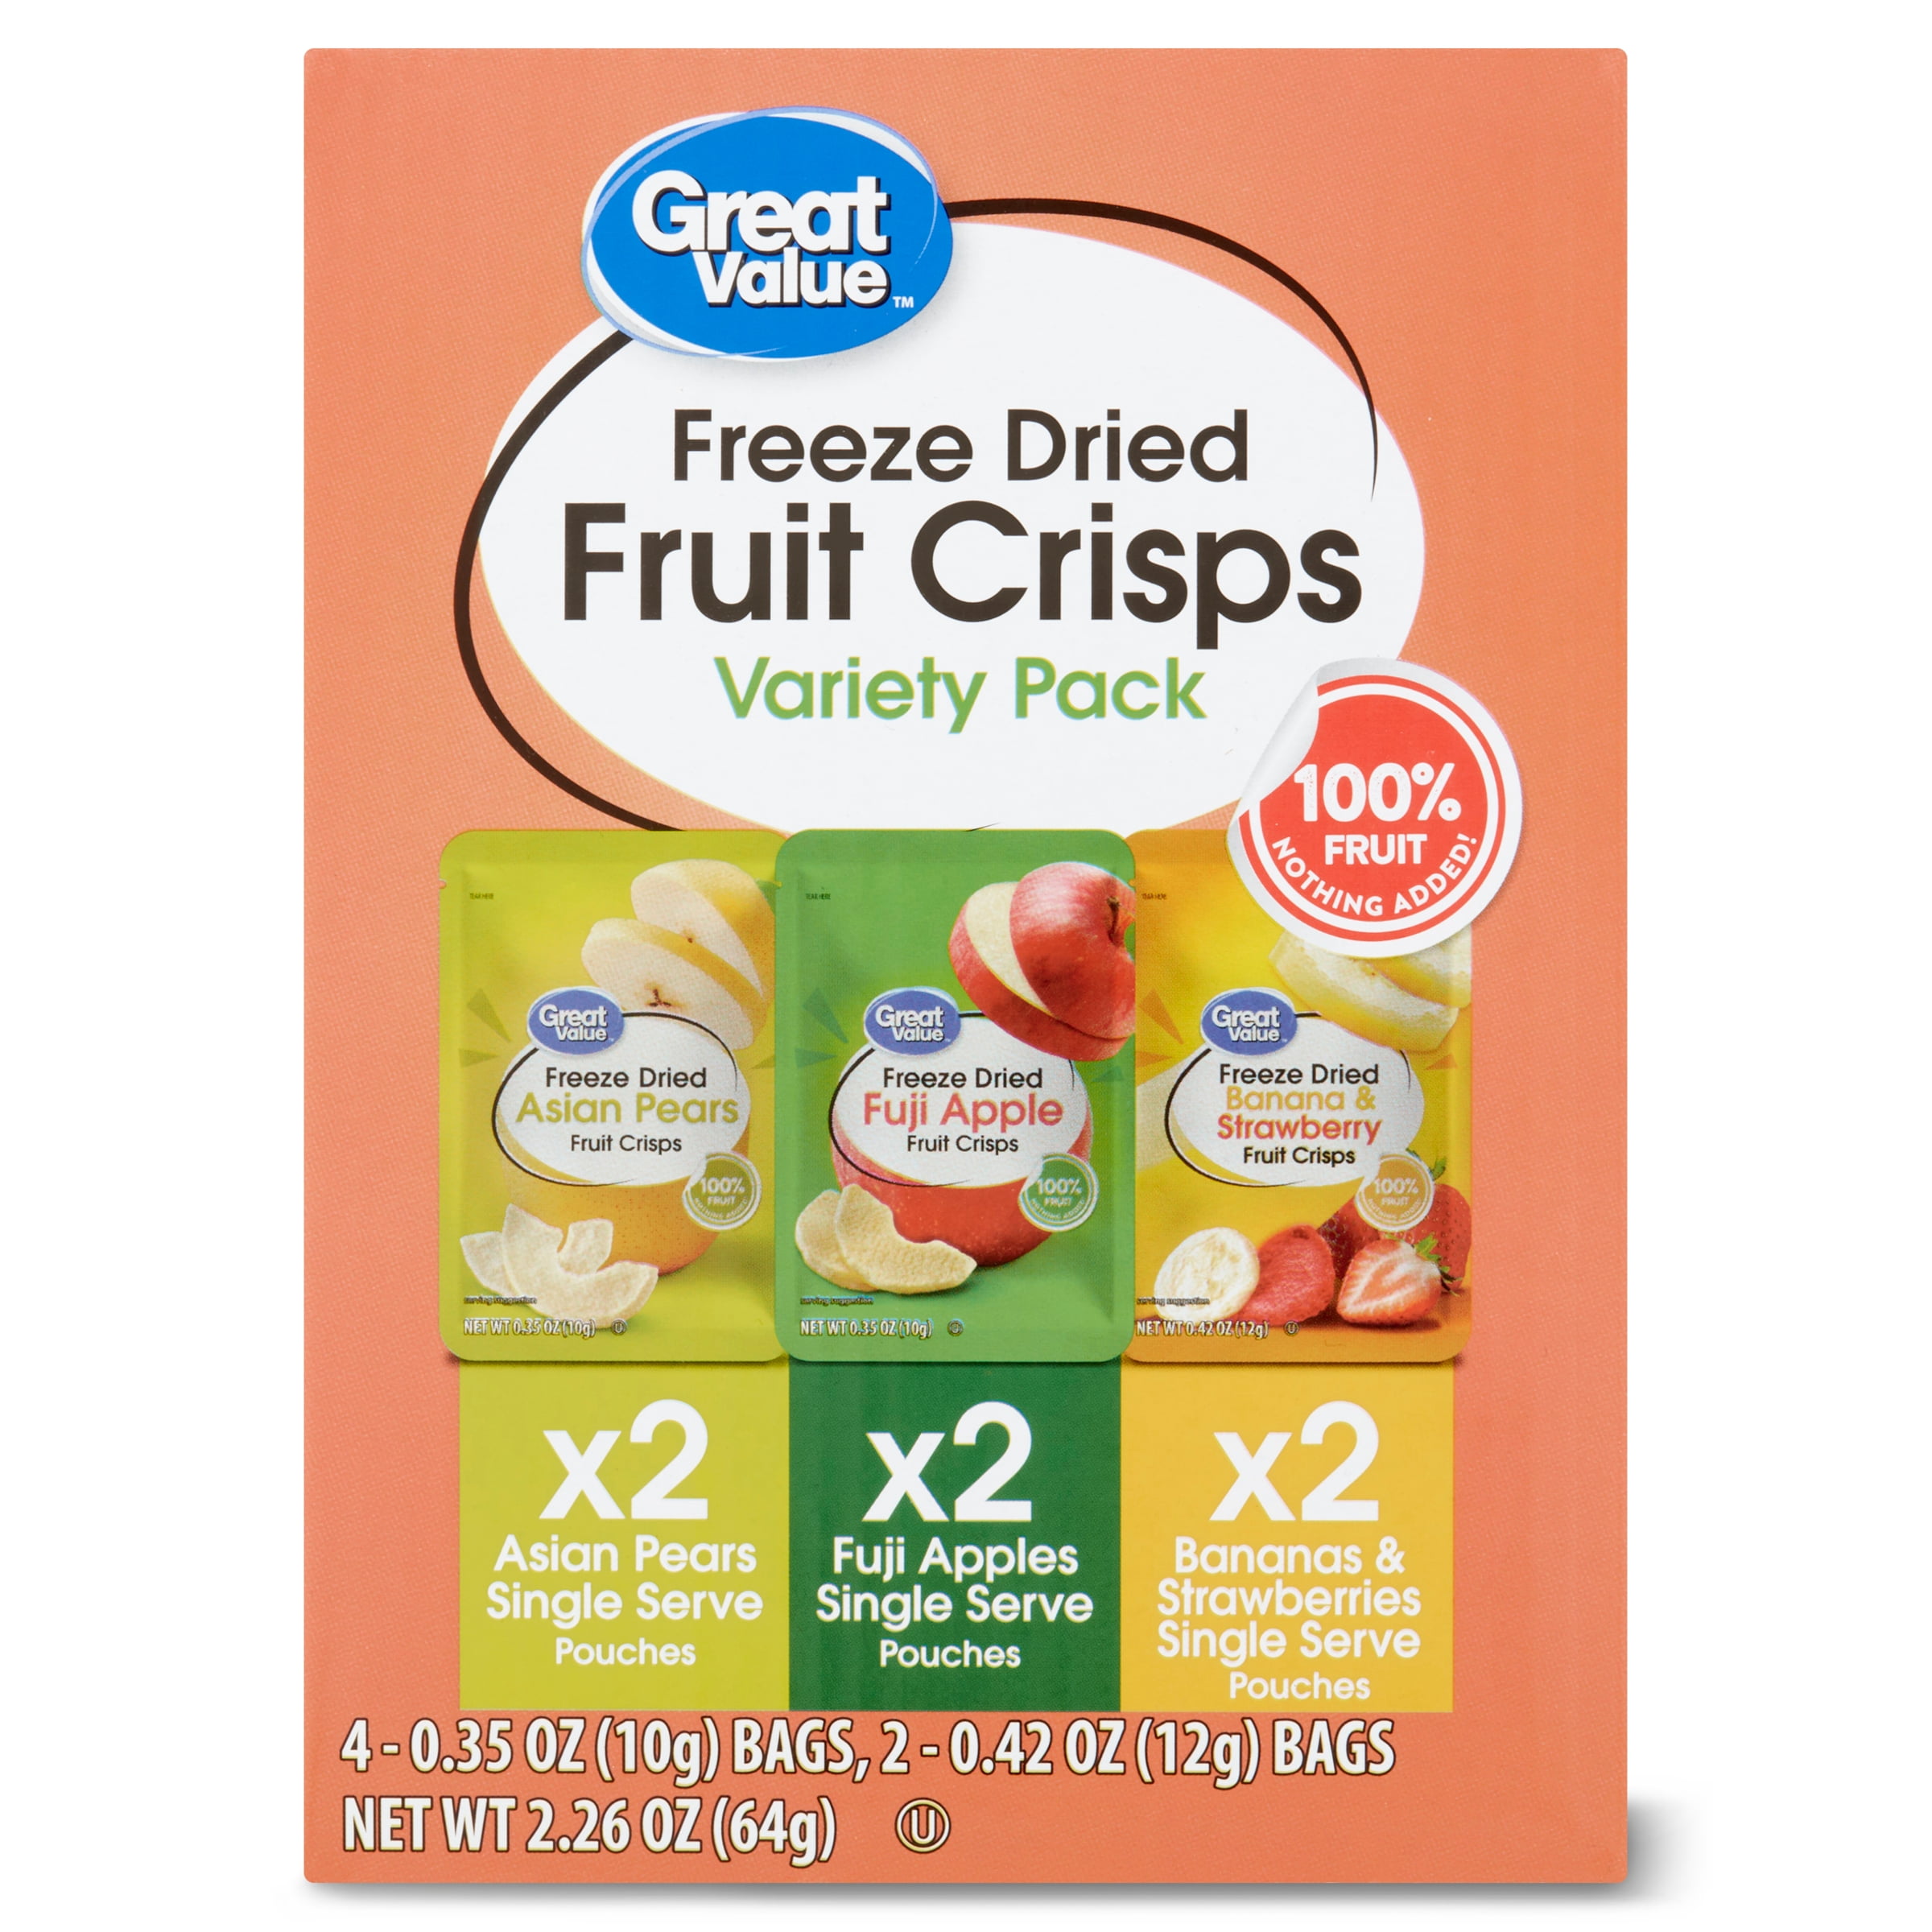 Great Value Freeze Dried Fruit Crisps, Variety Pack, 6 Count,  oz. -  